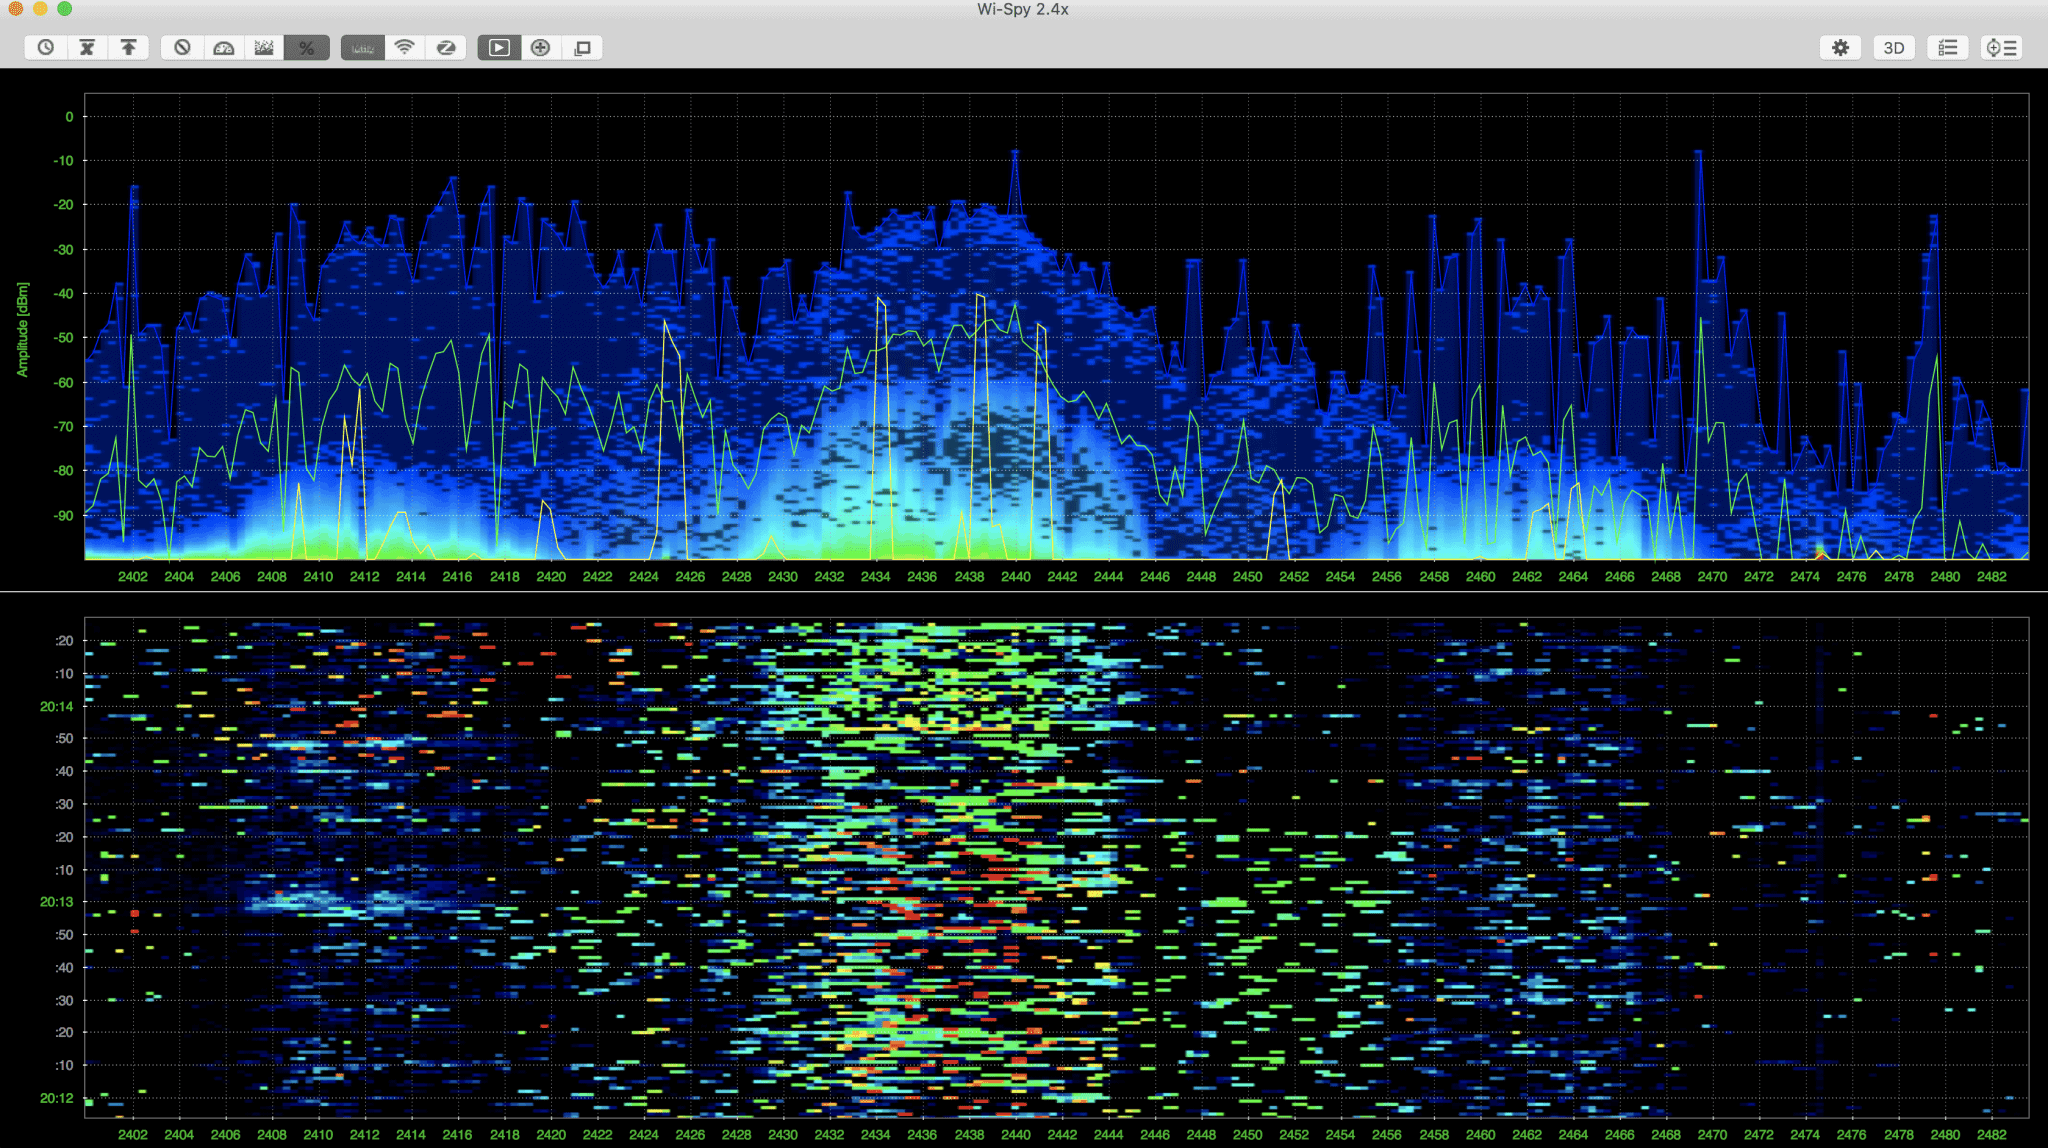 2Ghz WiFi spectrum scan from a recent marina visit showing how busy it is